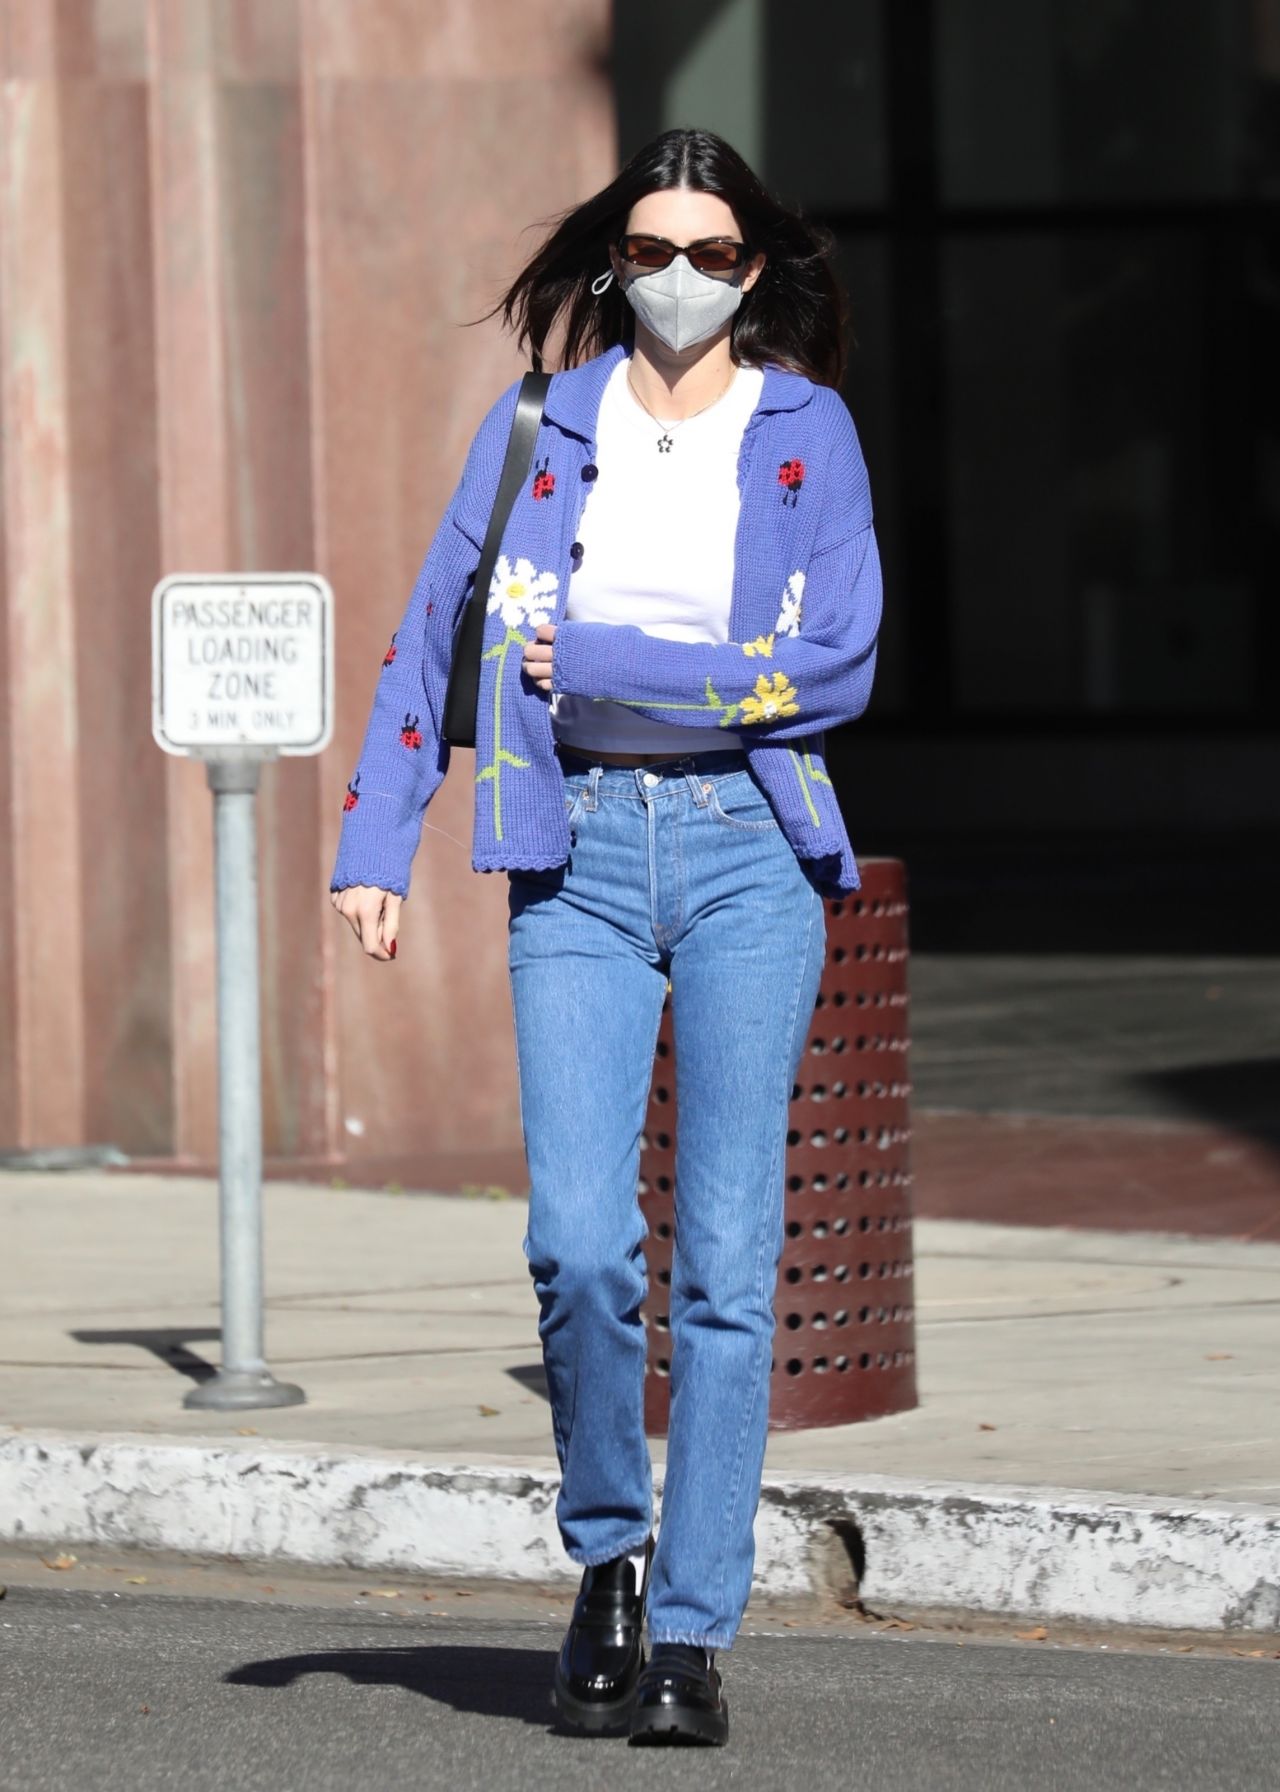 Kendall Jenner Los Angeles December 6, 2017 – Star Style